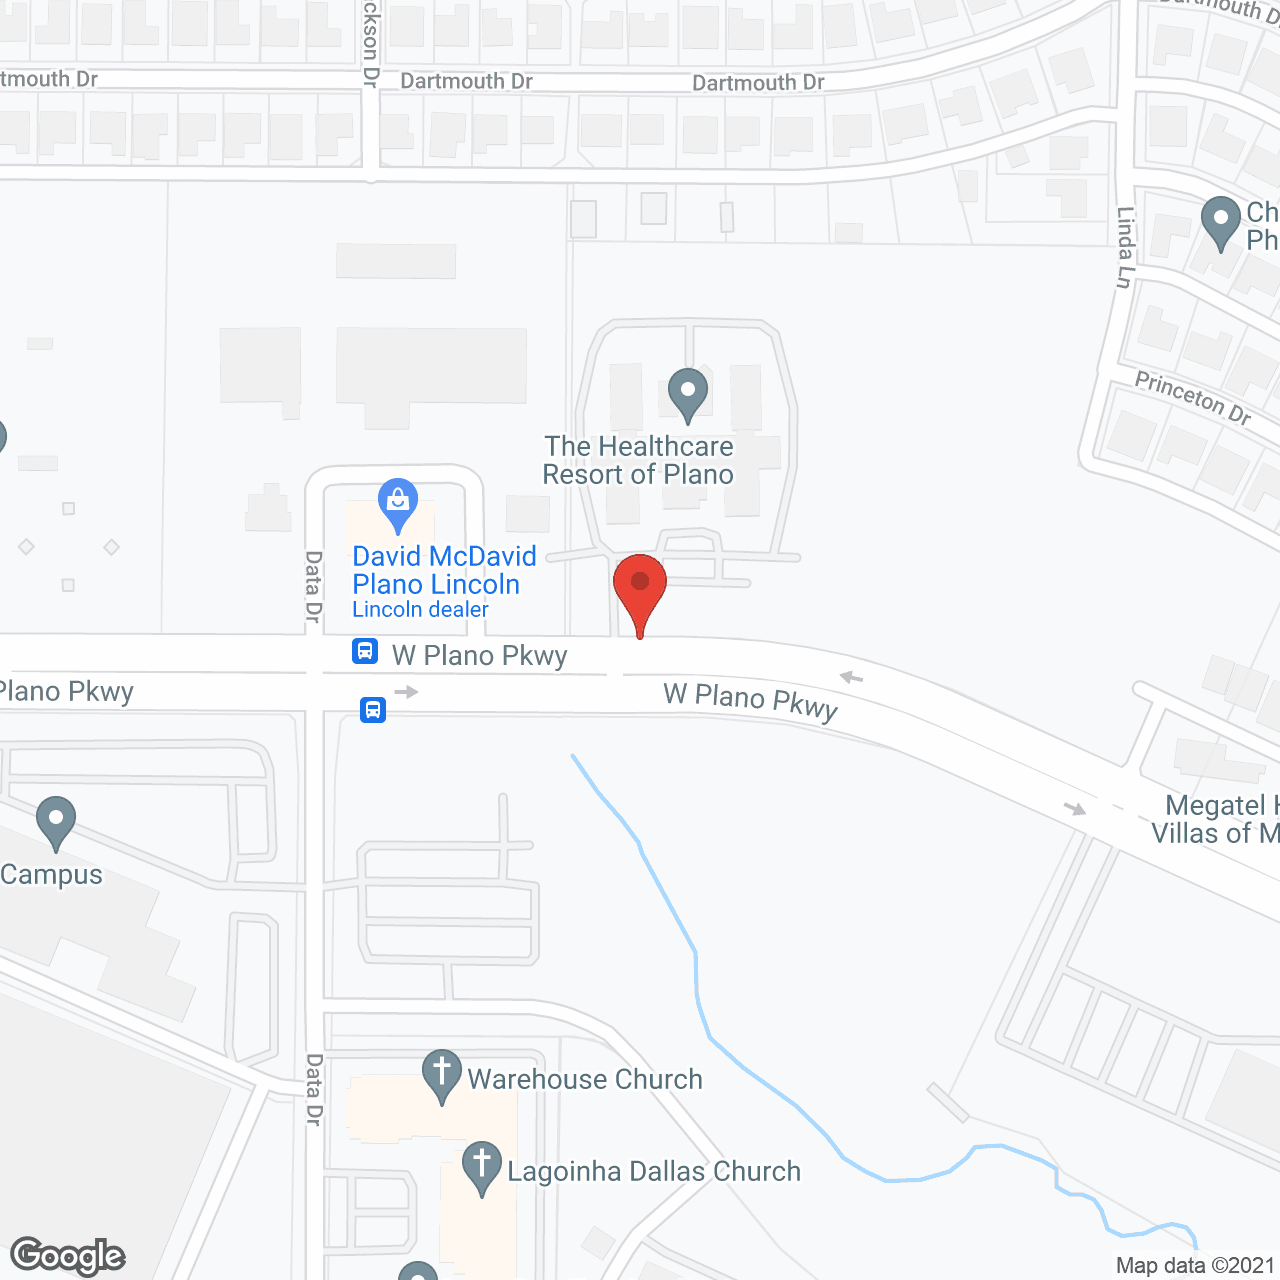 The Healthcare Resort of Plano in google map